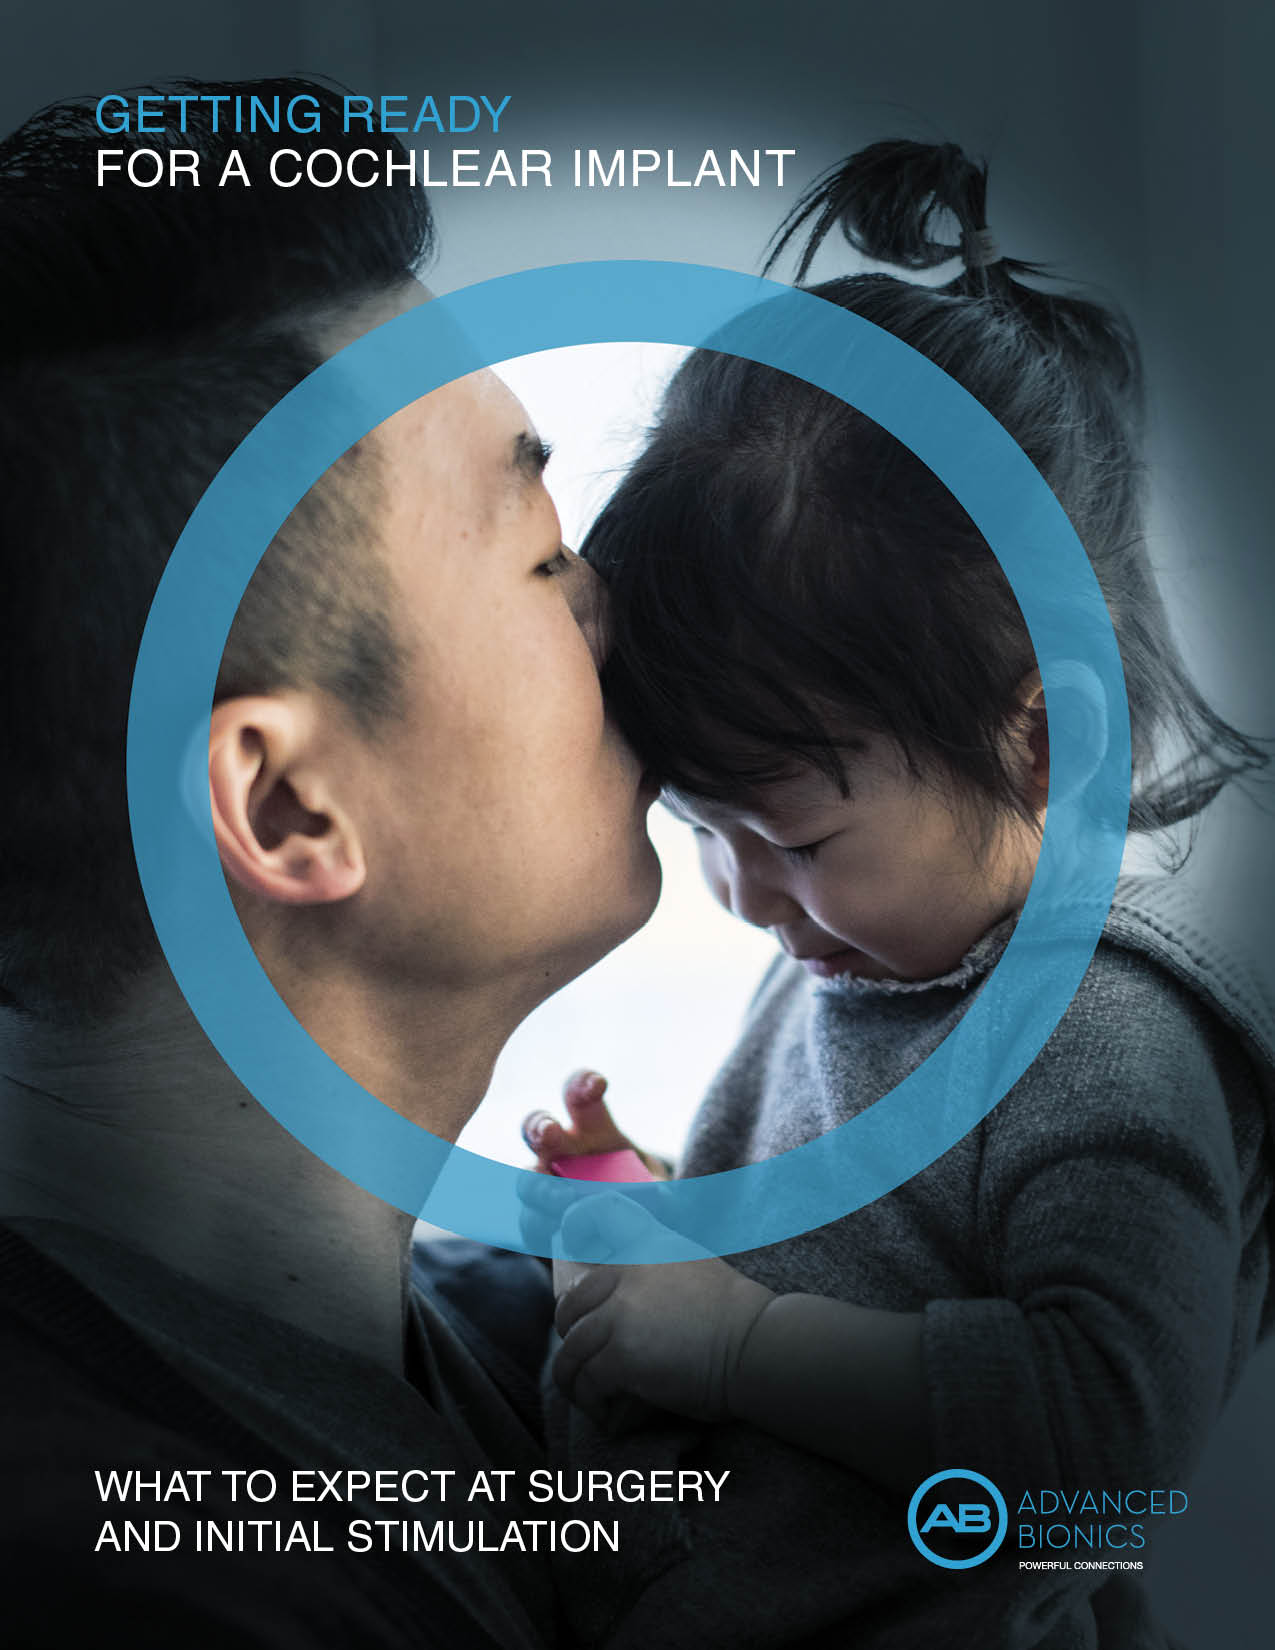 The front page of the brochure shows a parent kissing his child